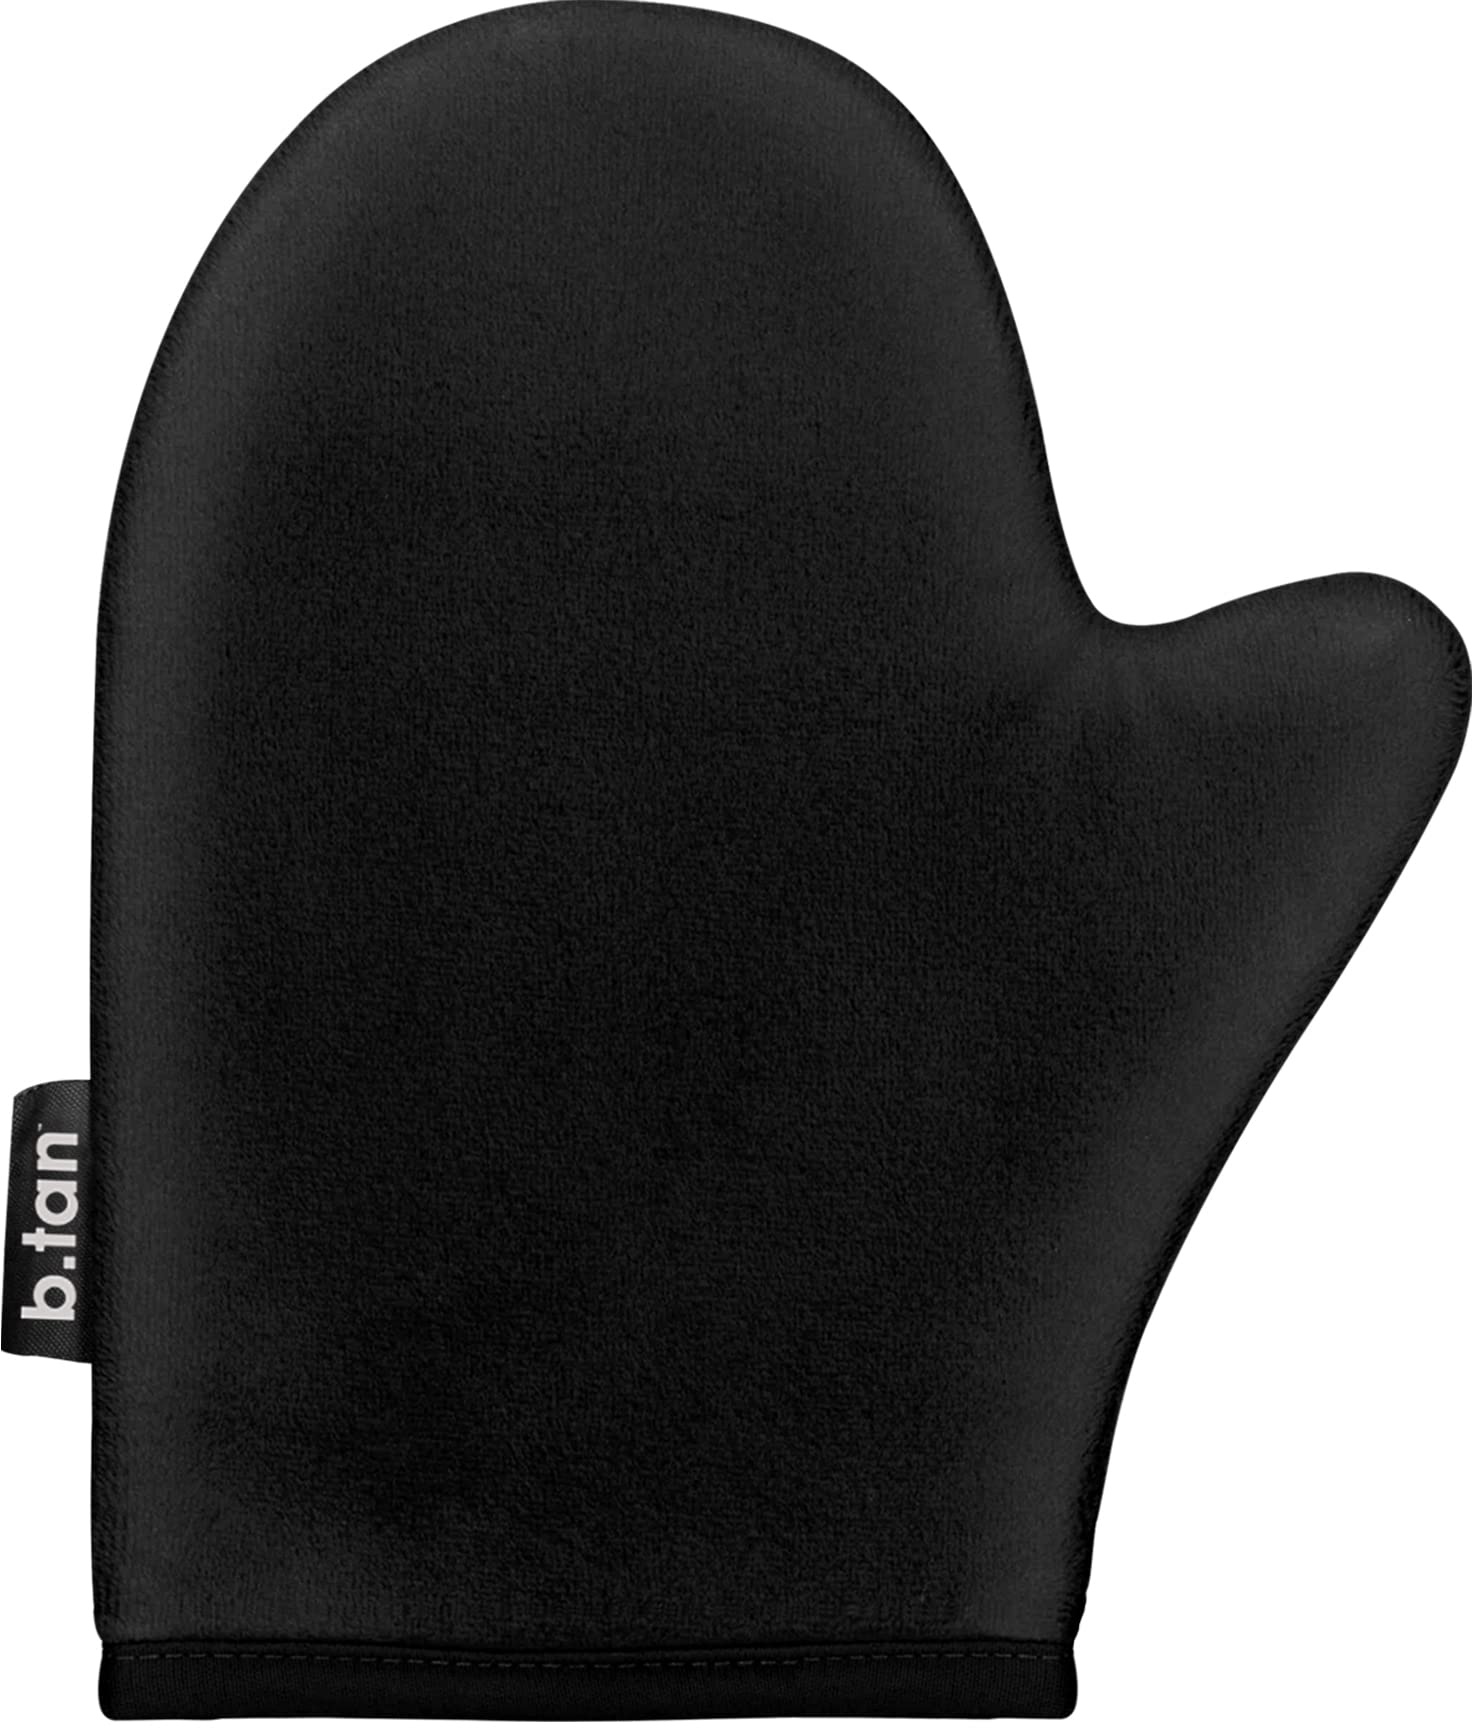 b.tan Body Self Tanning Mitt | I Don't Want Tan On My Hands - Self Tanning Applicator Glove with Thumb, Streak-Free, Even Application, Velvety Soft, Reusable & Washable Sunless Tan